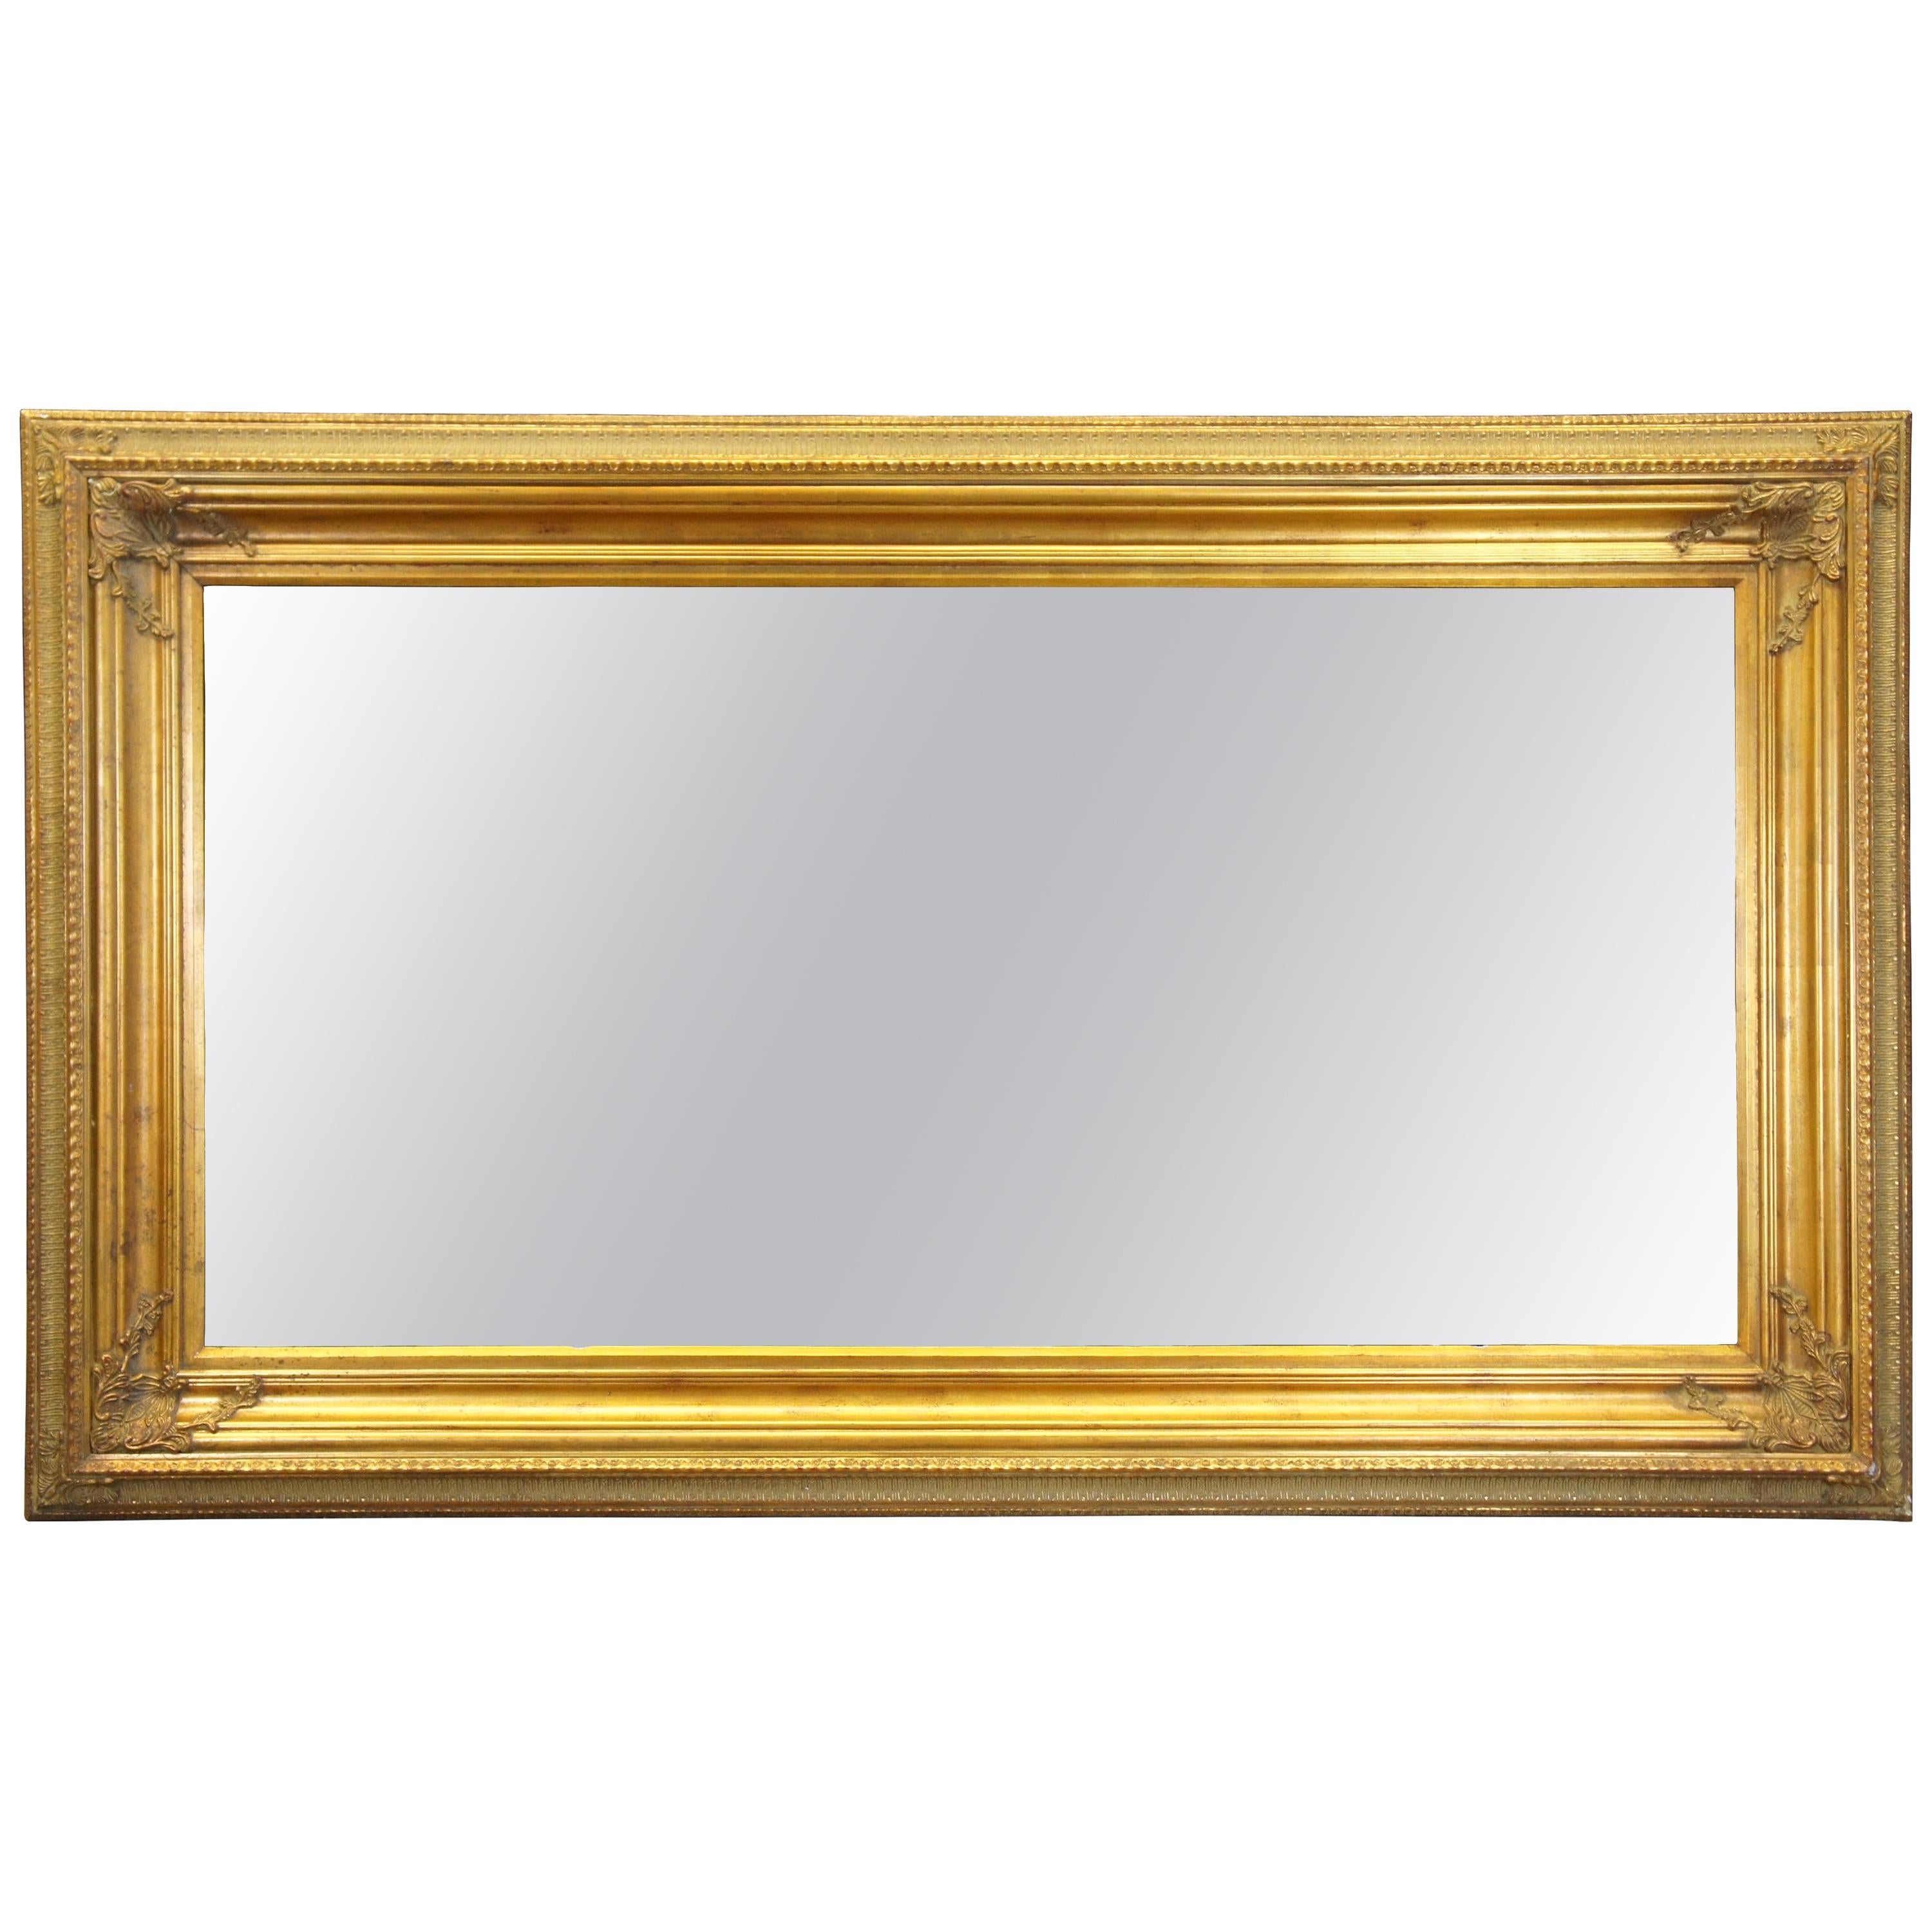 Monumental French Gold Wood Artwork or Mirror Frame Picture Floor Wall